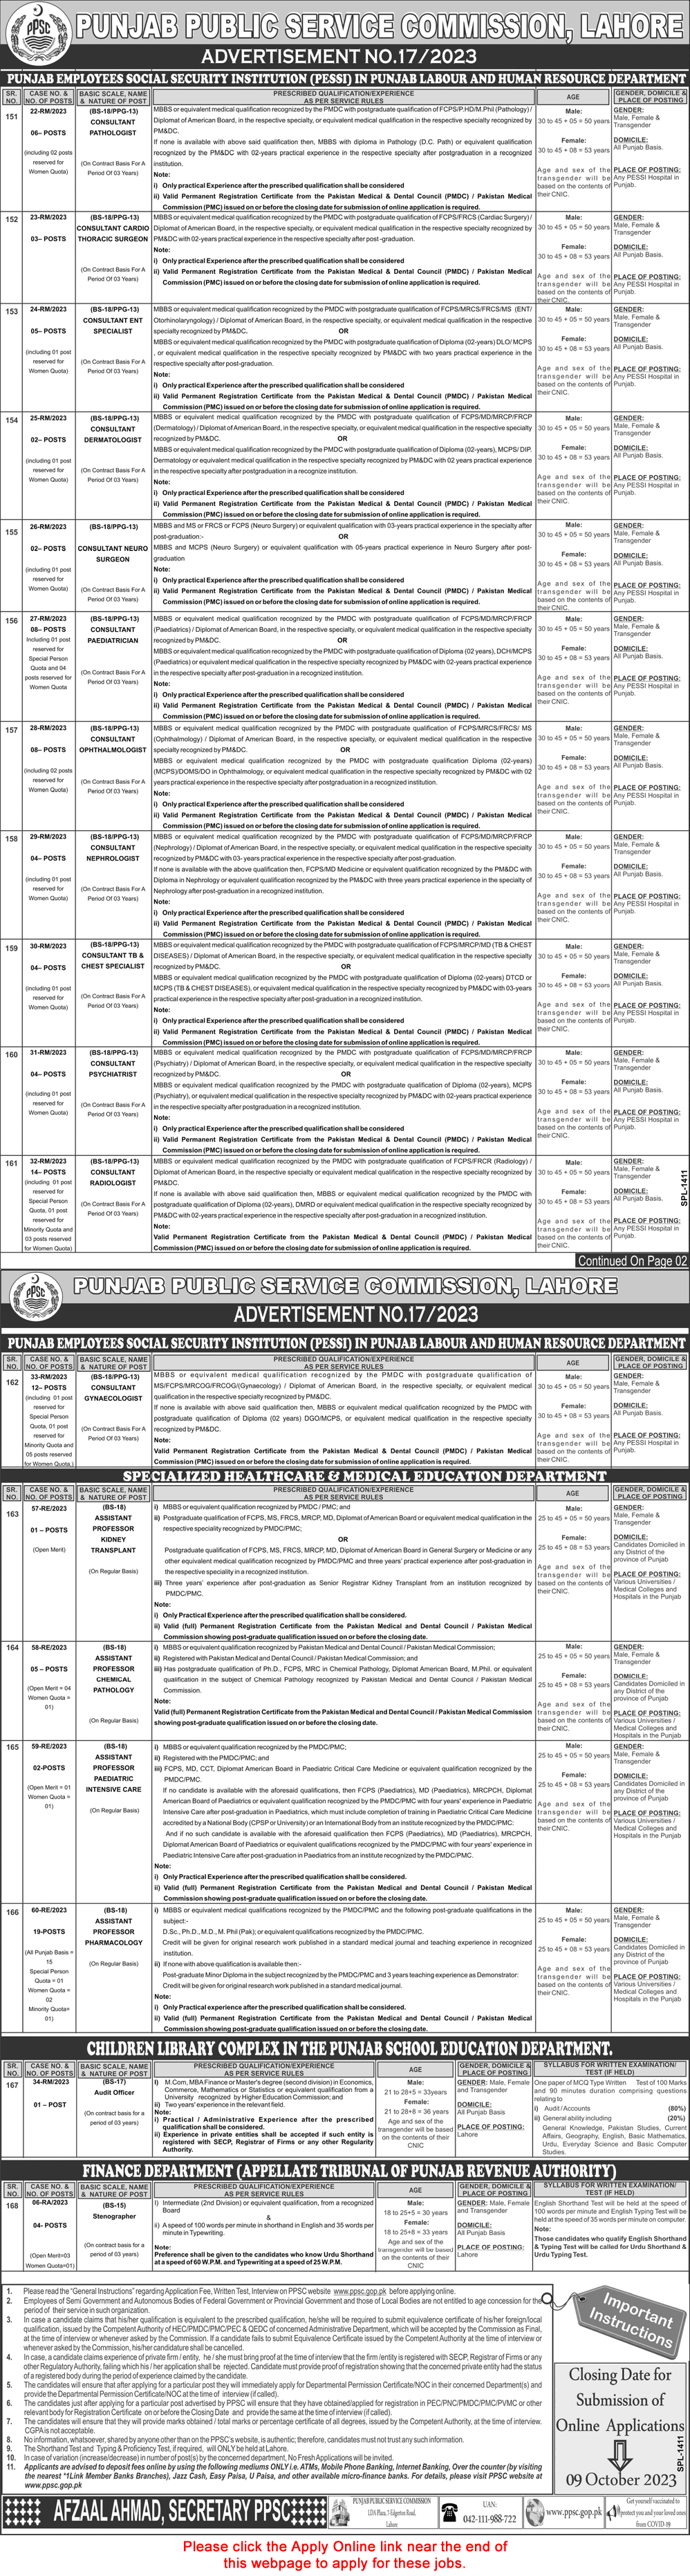 PPSC Jobs September 2023 Apply Online Consolidated Advertisement No 17/2023 Latest